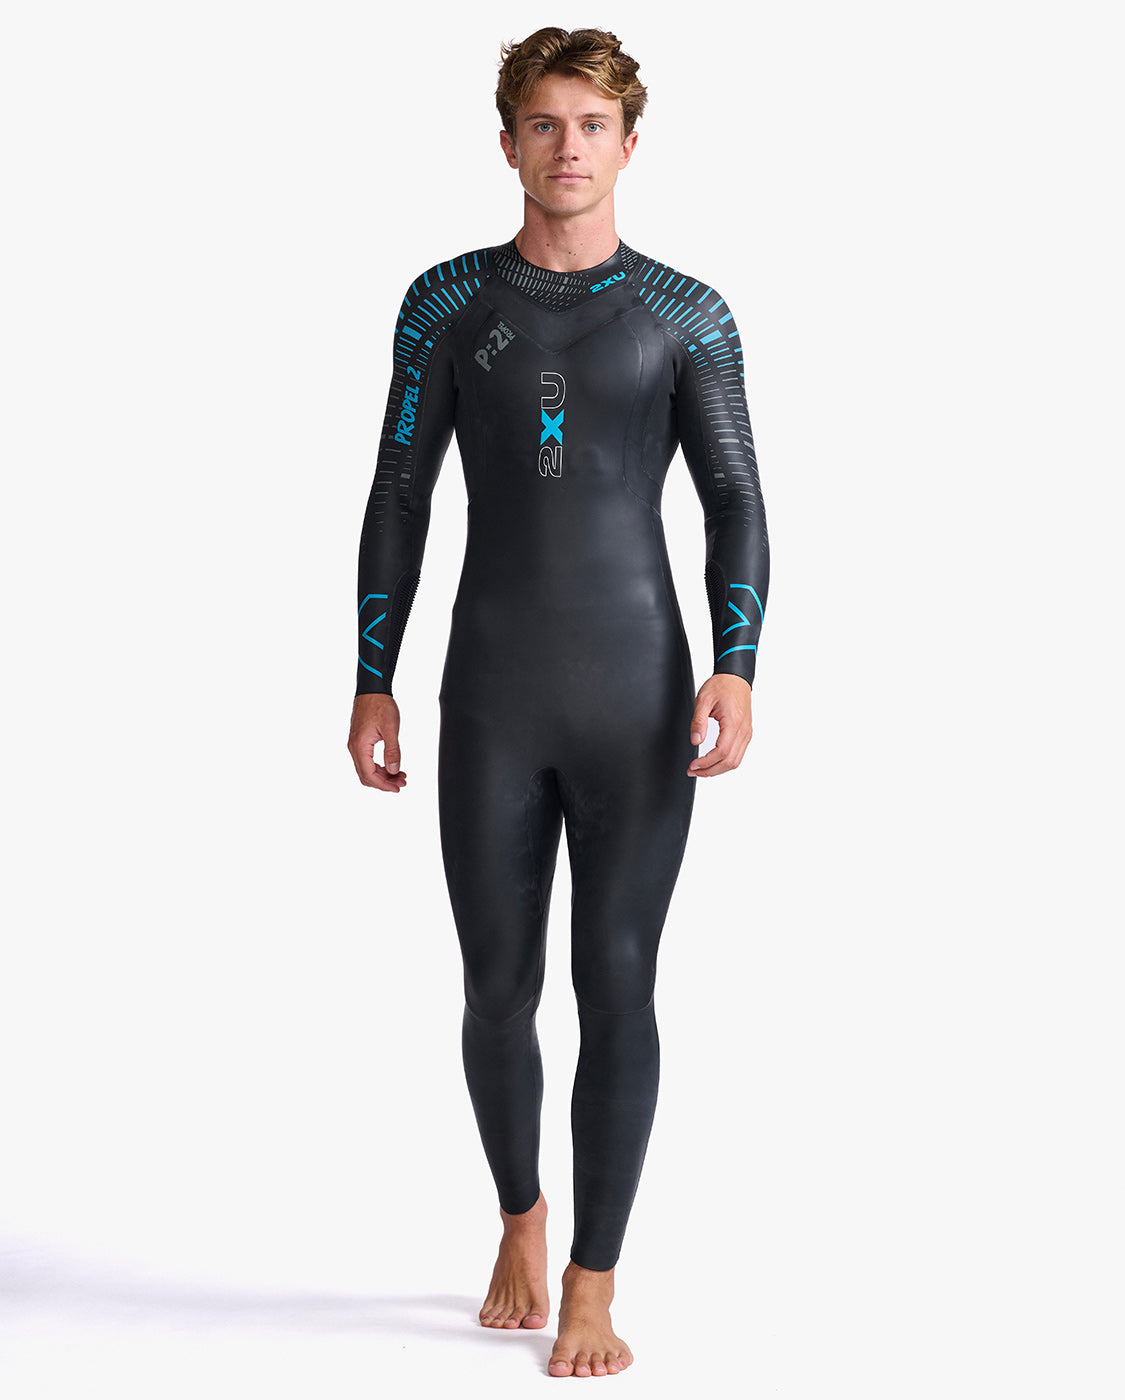 MyTriathlon - the Widest Range of 2XU Compression. Free Delivery